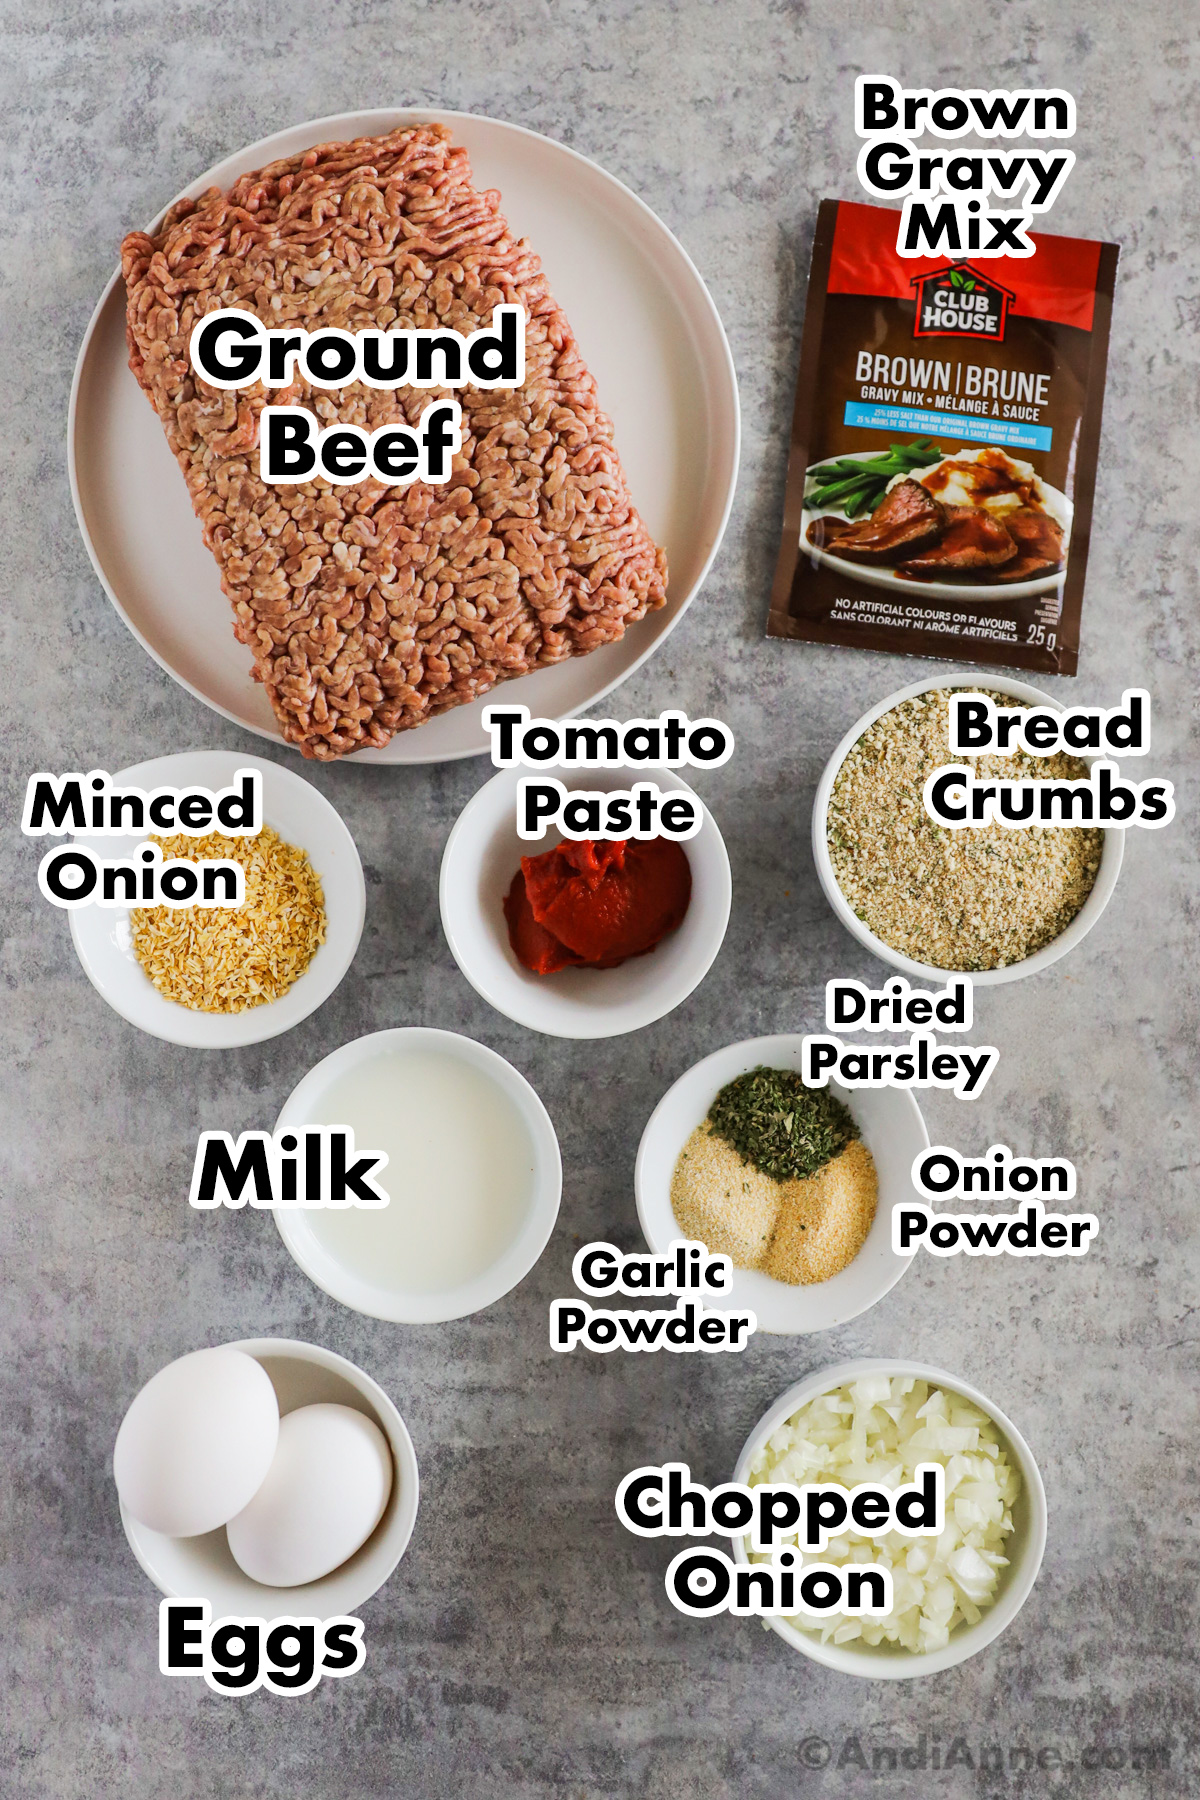 Recipe ingredients on a counter including raw ground beef, packet of brown gravy, bowls of minced onion, tomato paste, bread crumbs, milk, spices, eggs and chopped onion.